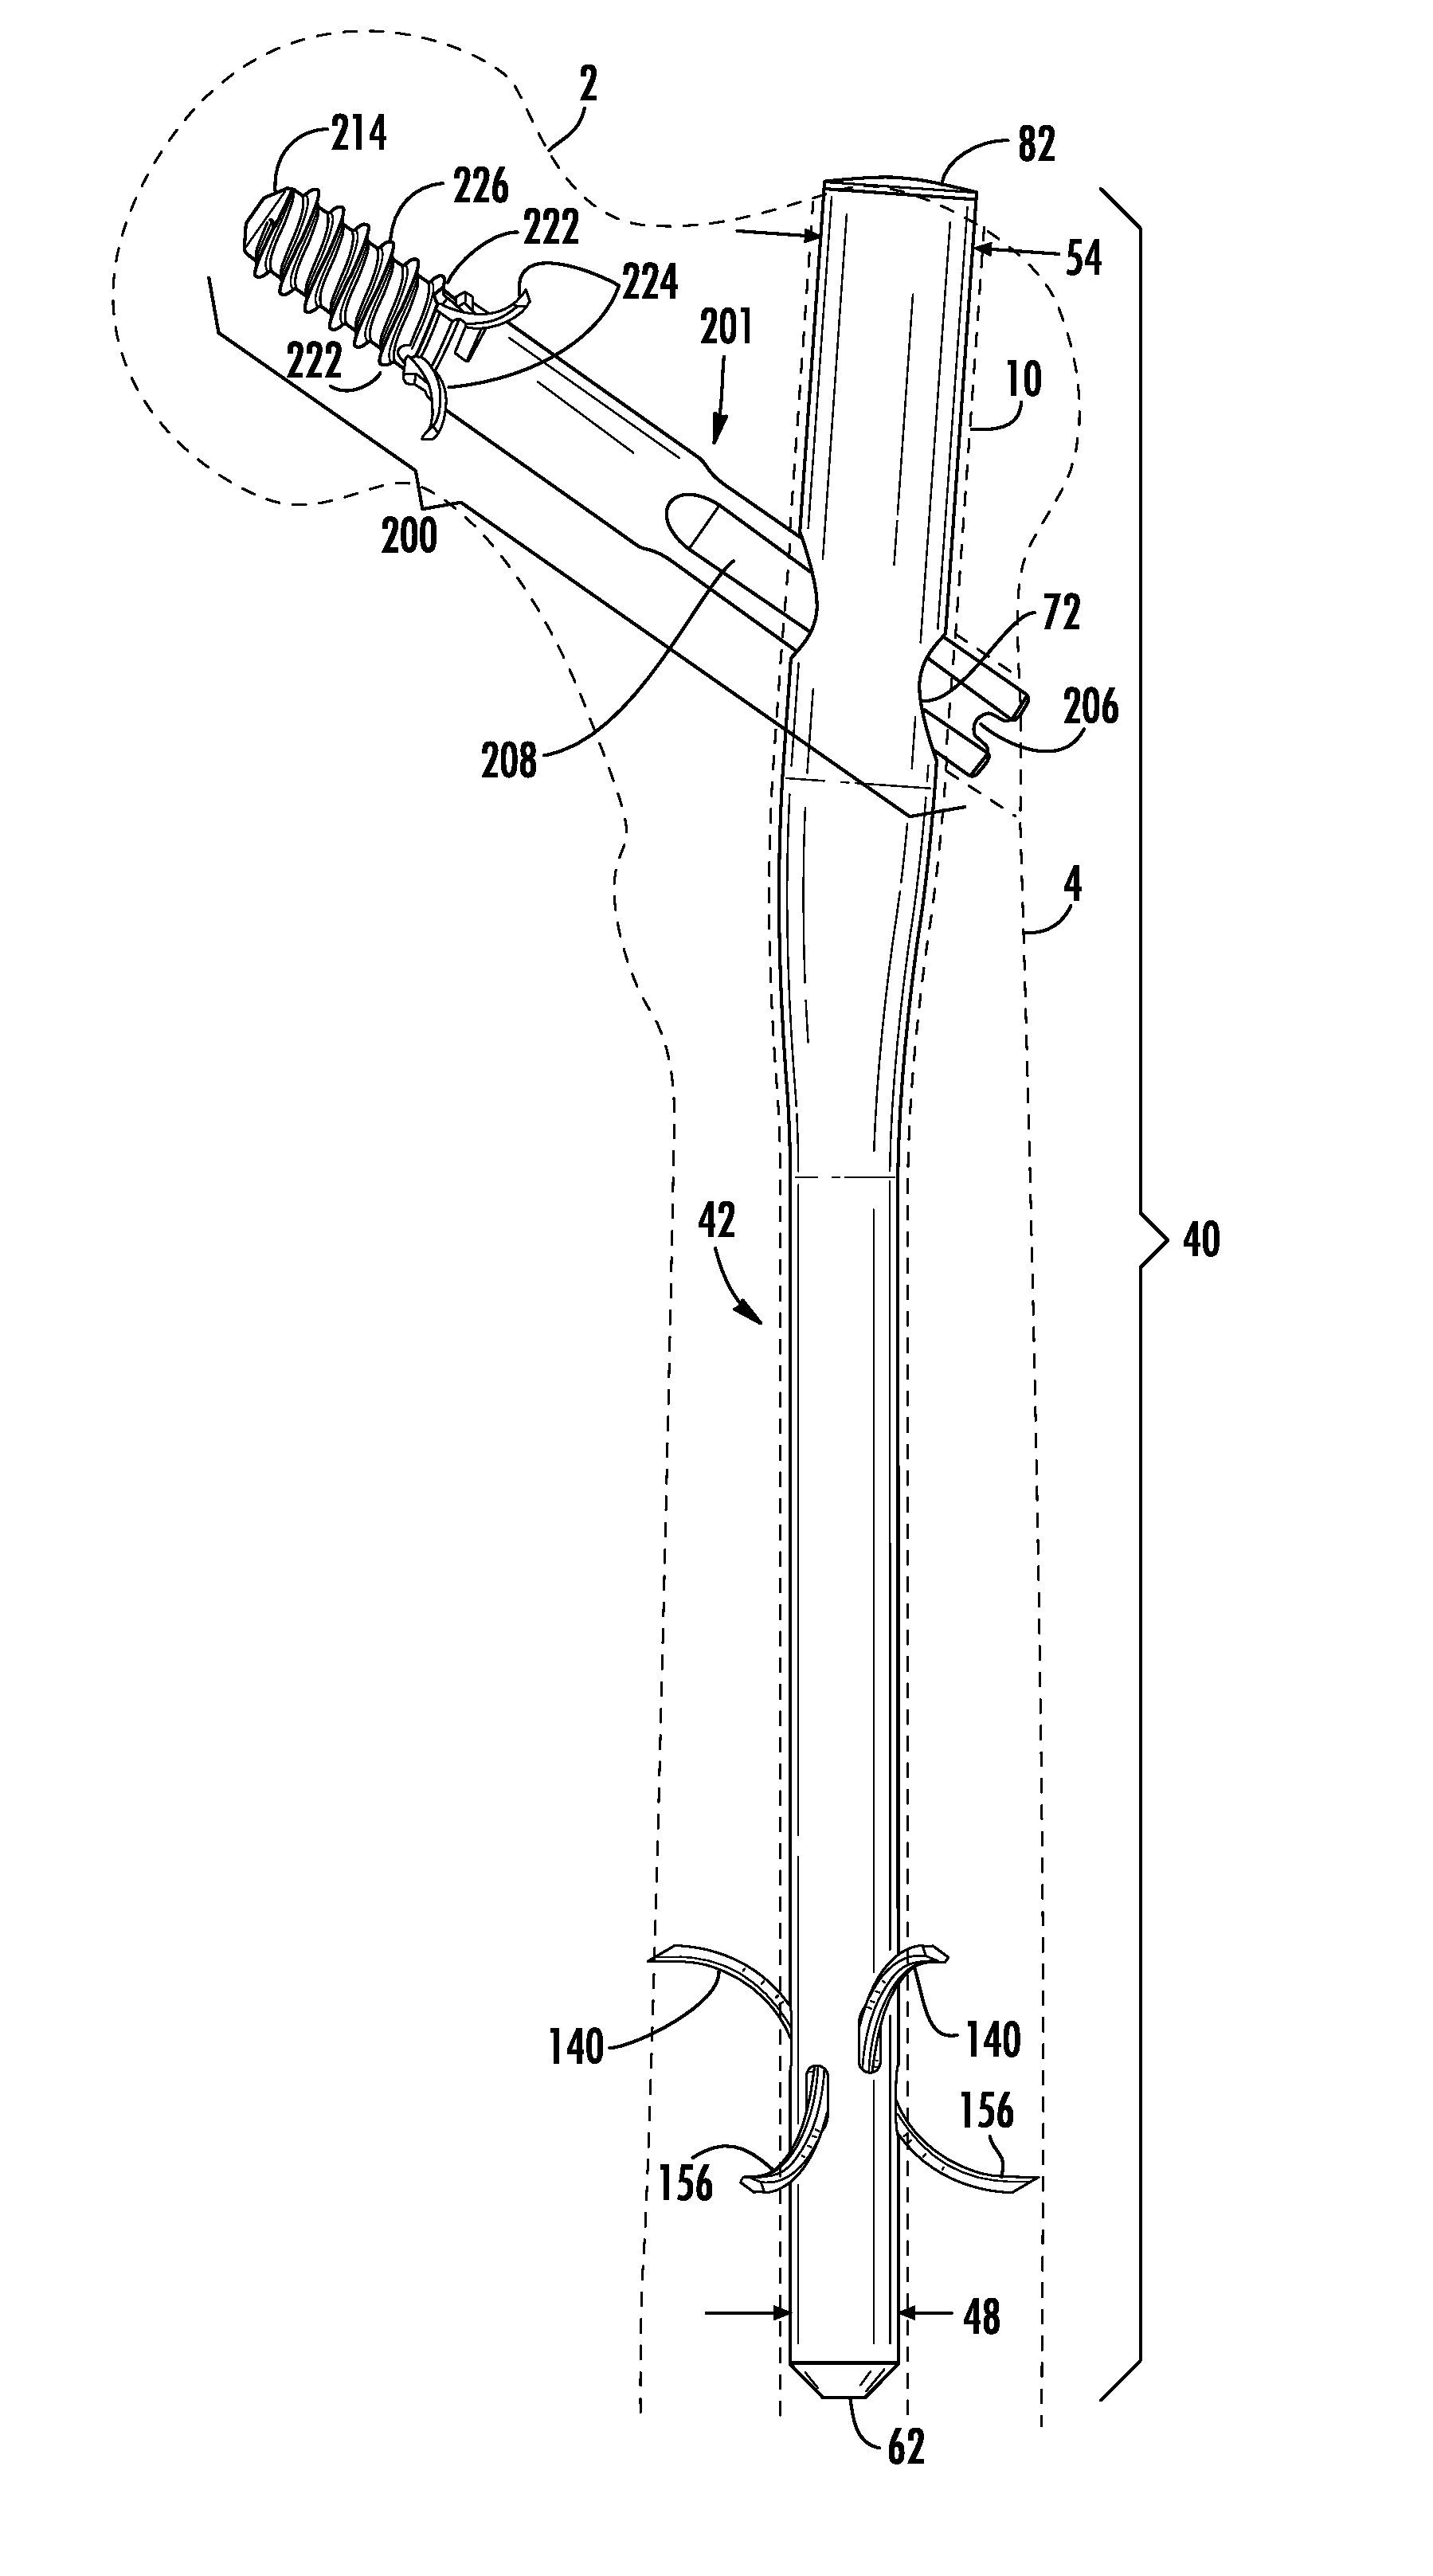 Intramedullary nail system including tang-deployment screw with male interface